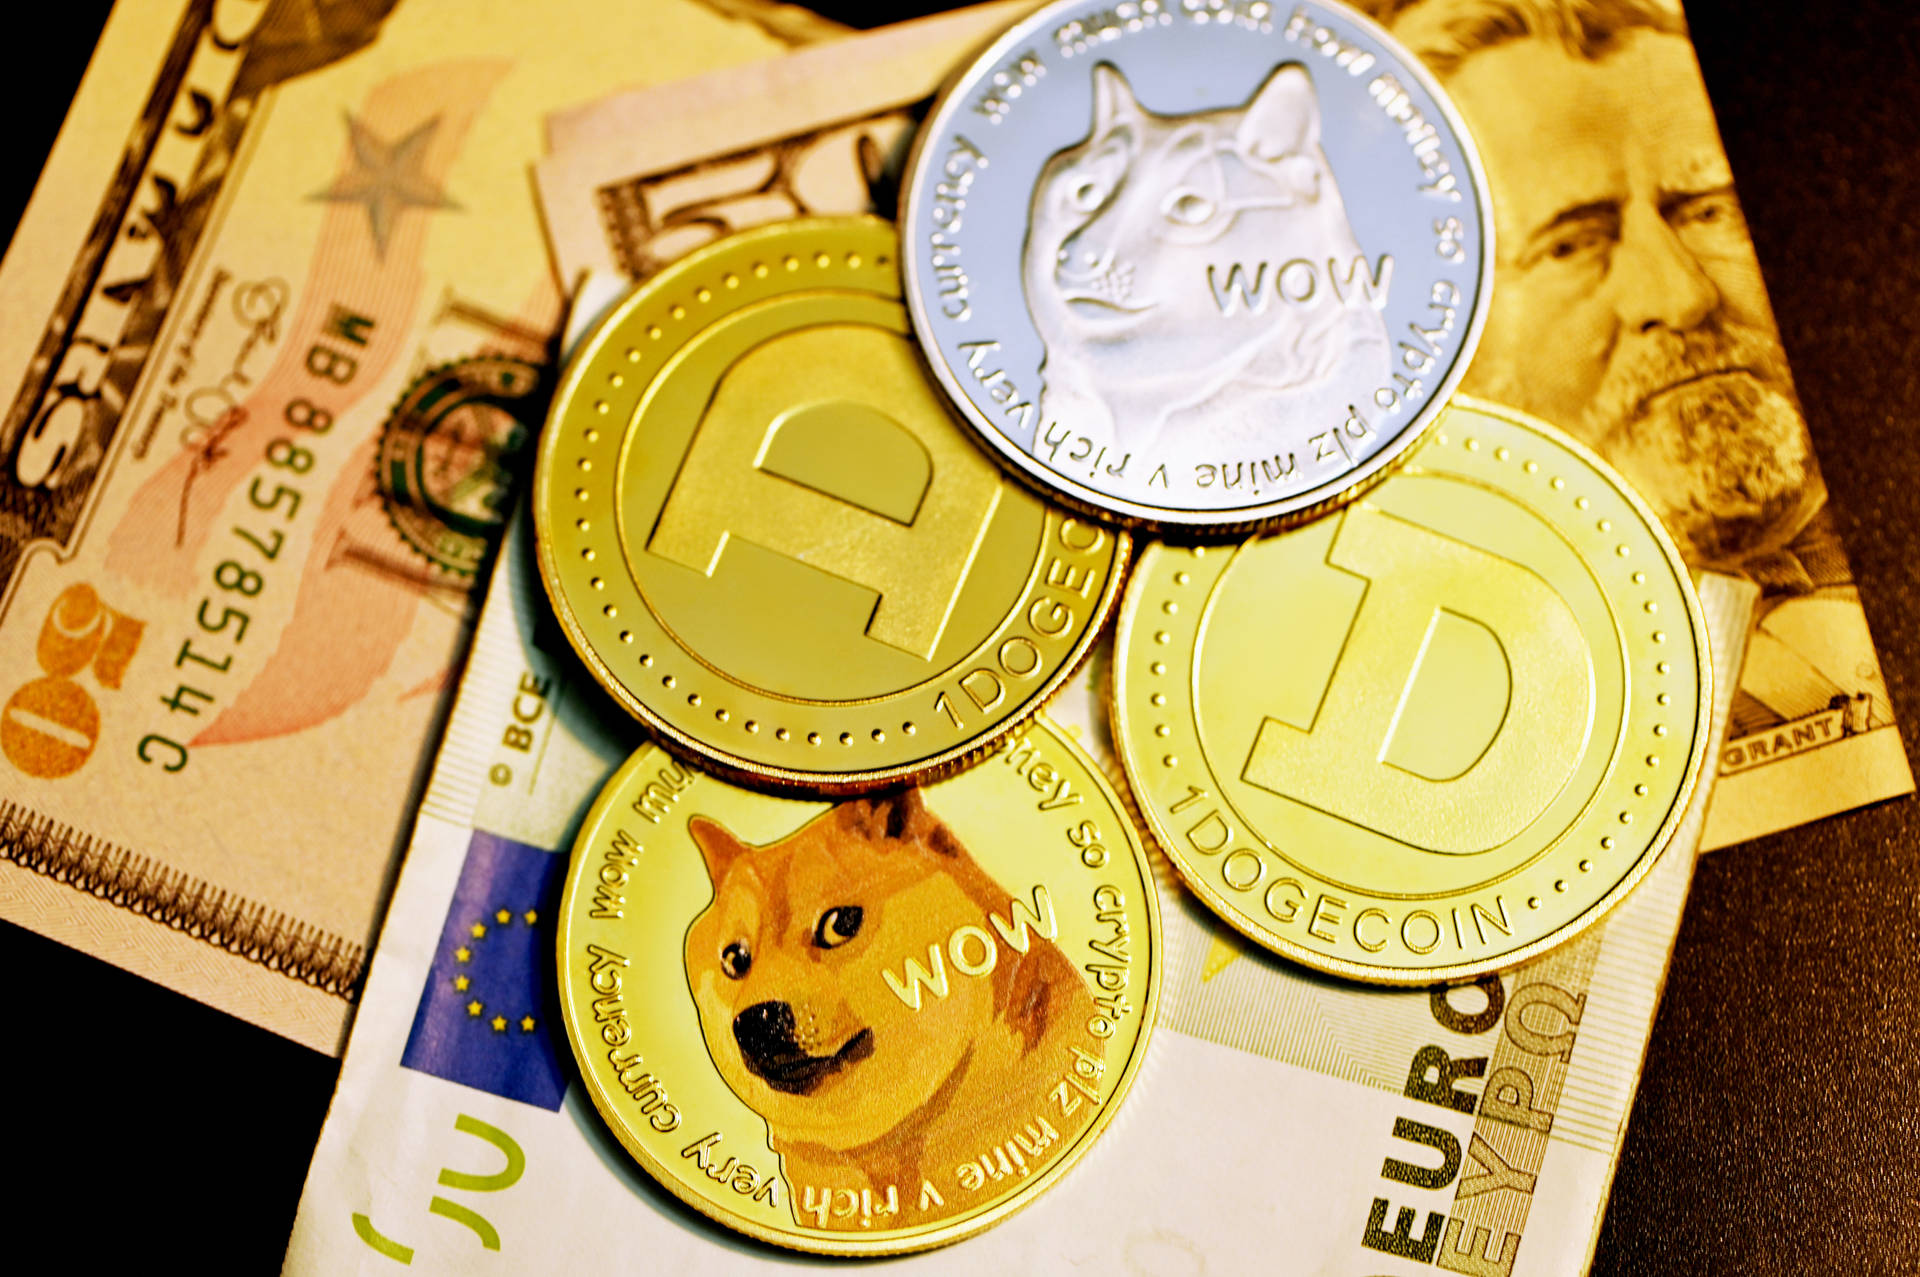 Dogecoin And Banknotes Background